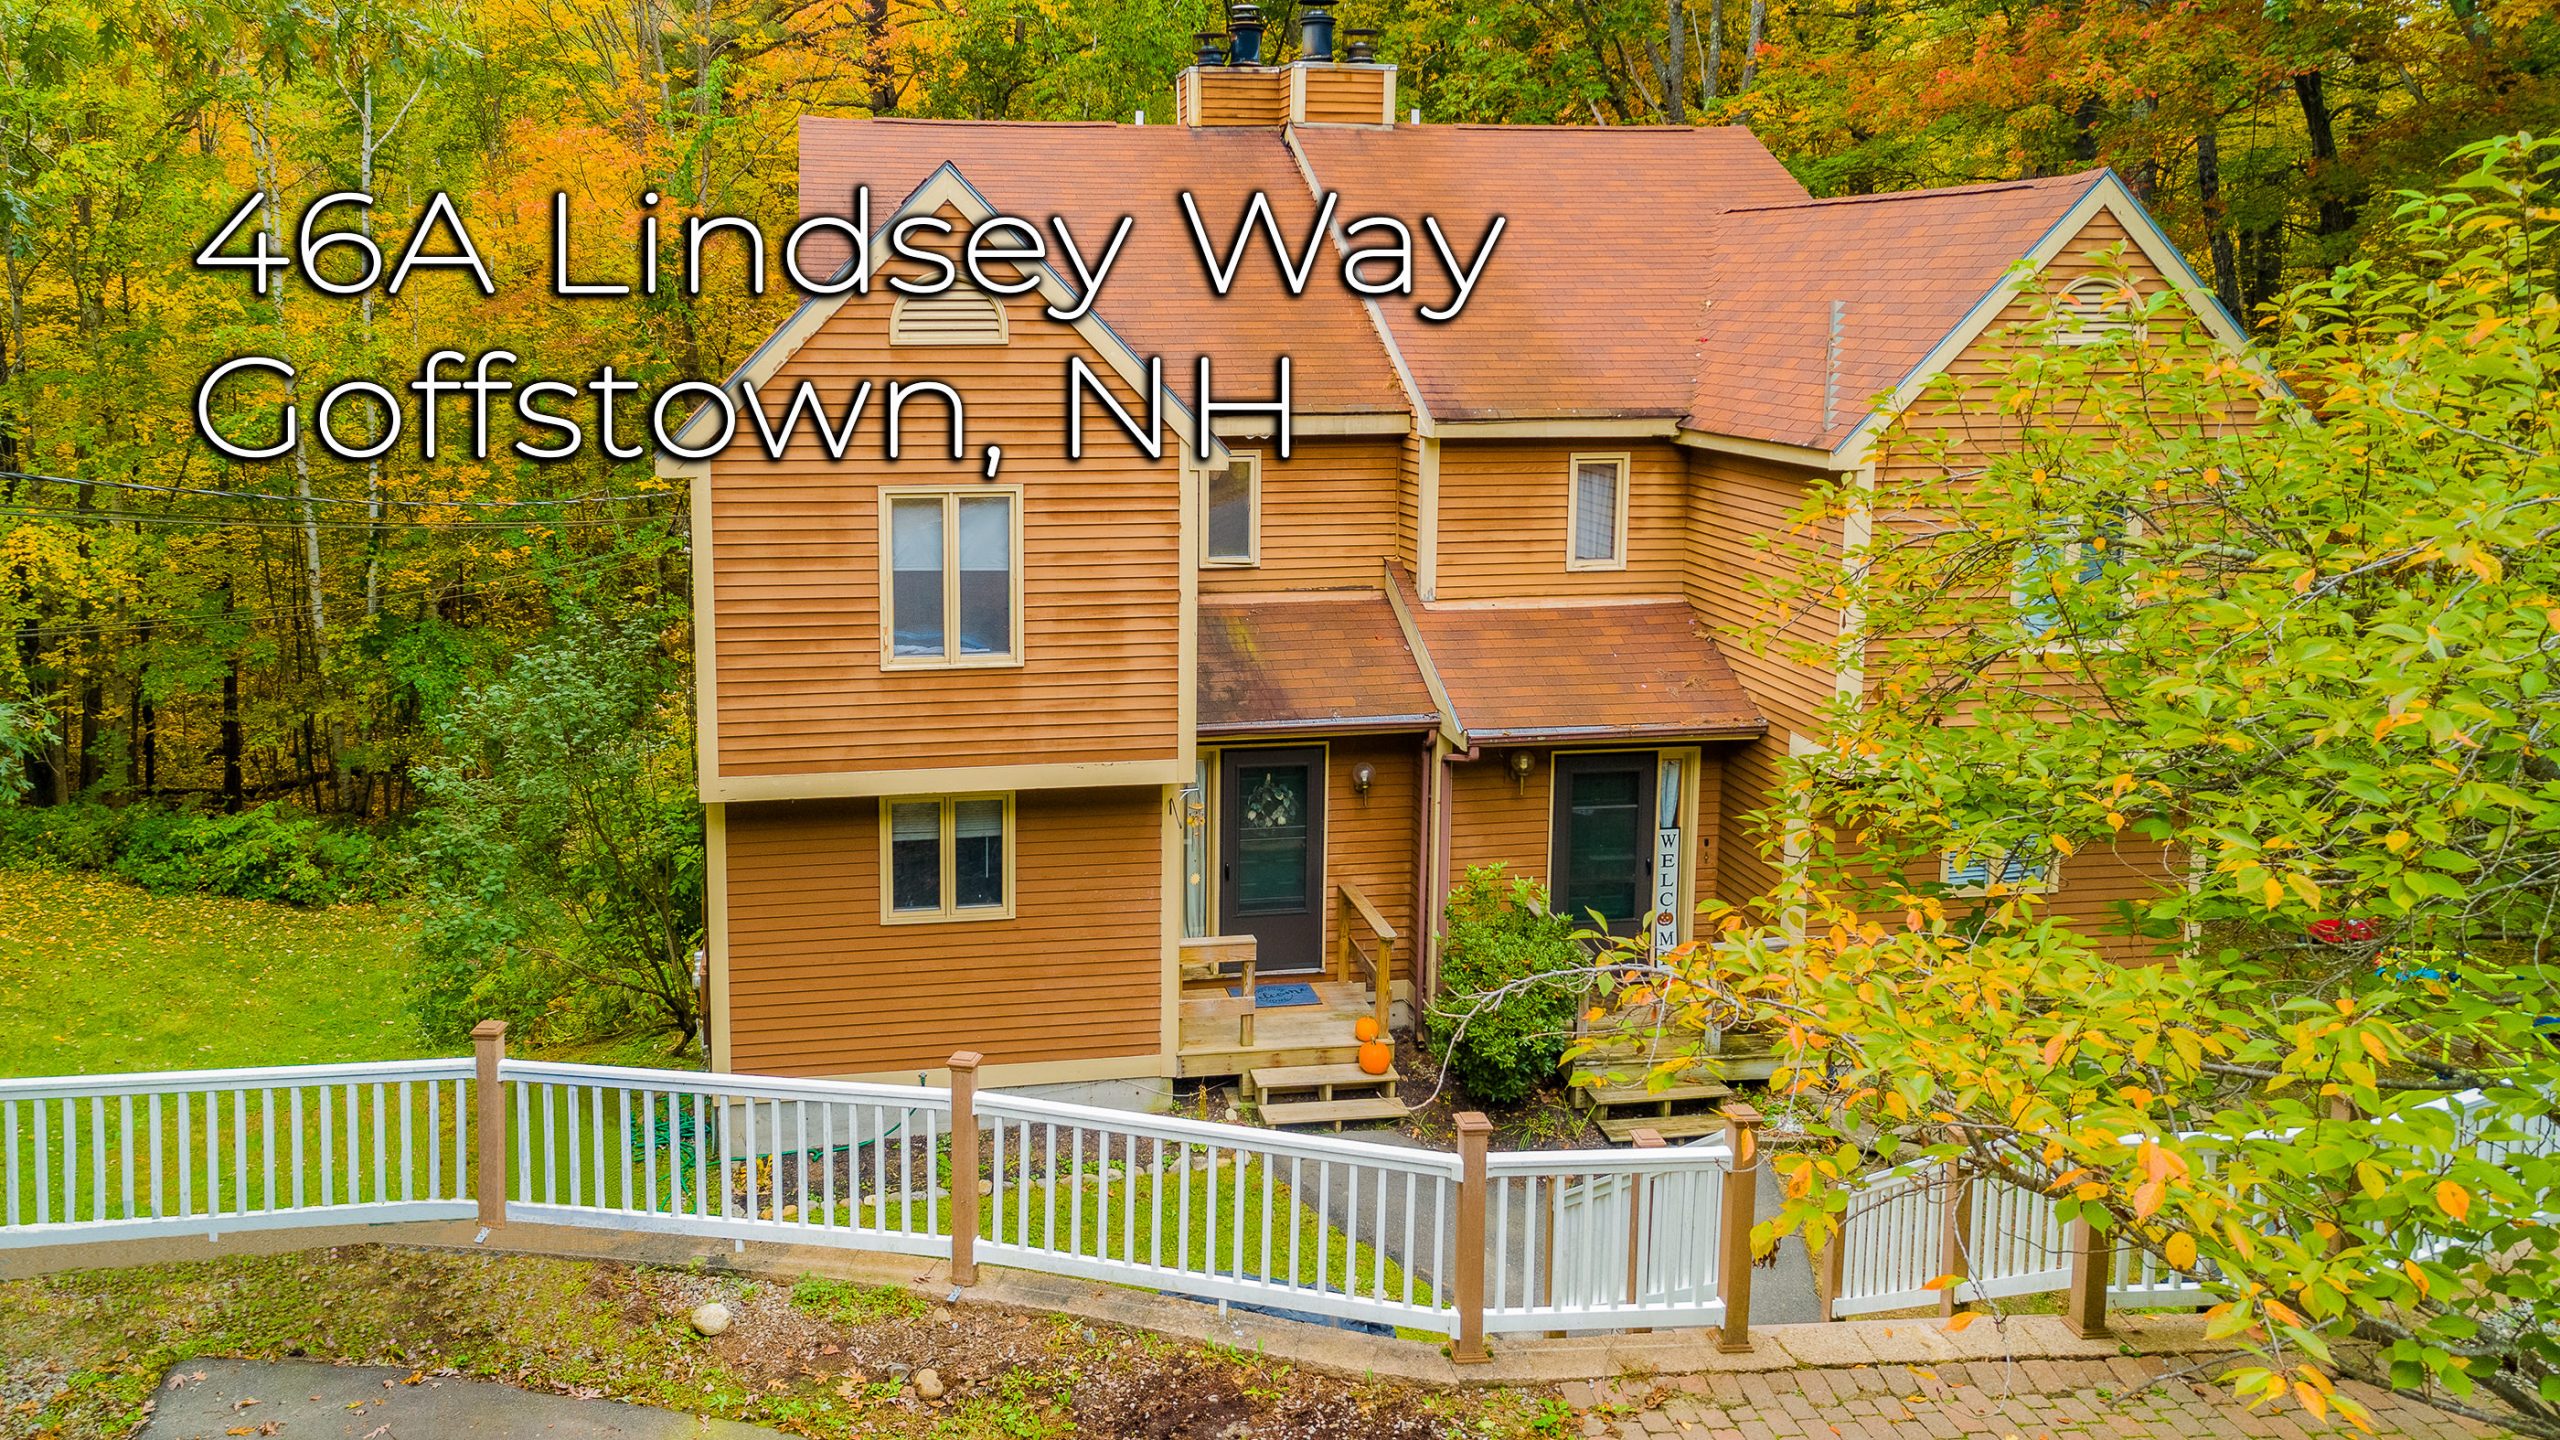 46A Lindsey Way Goffstown NH 03045